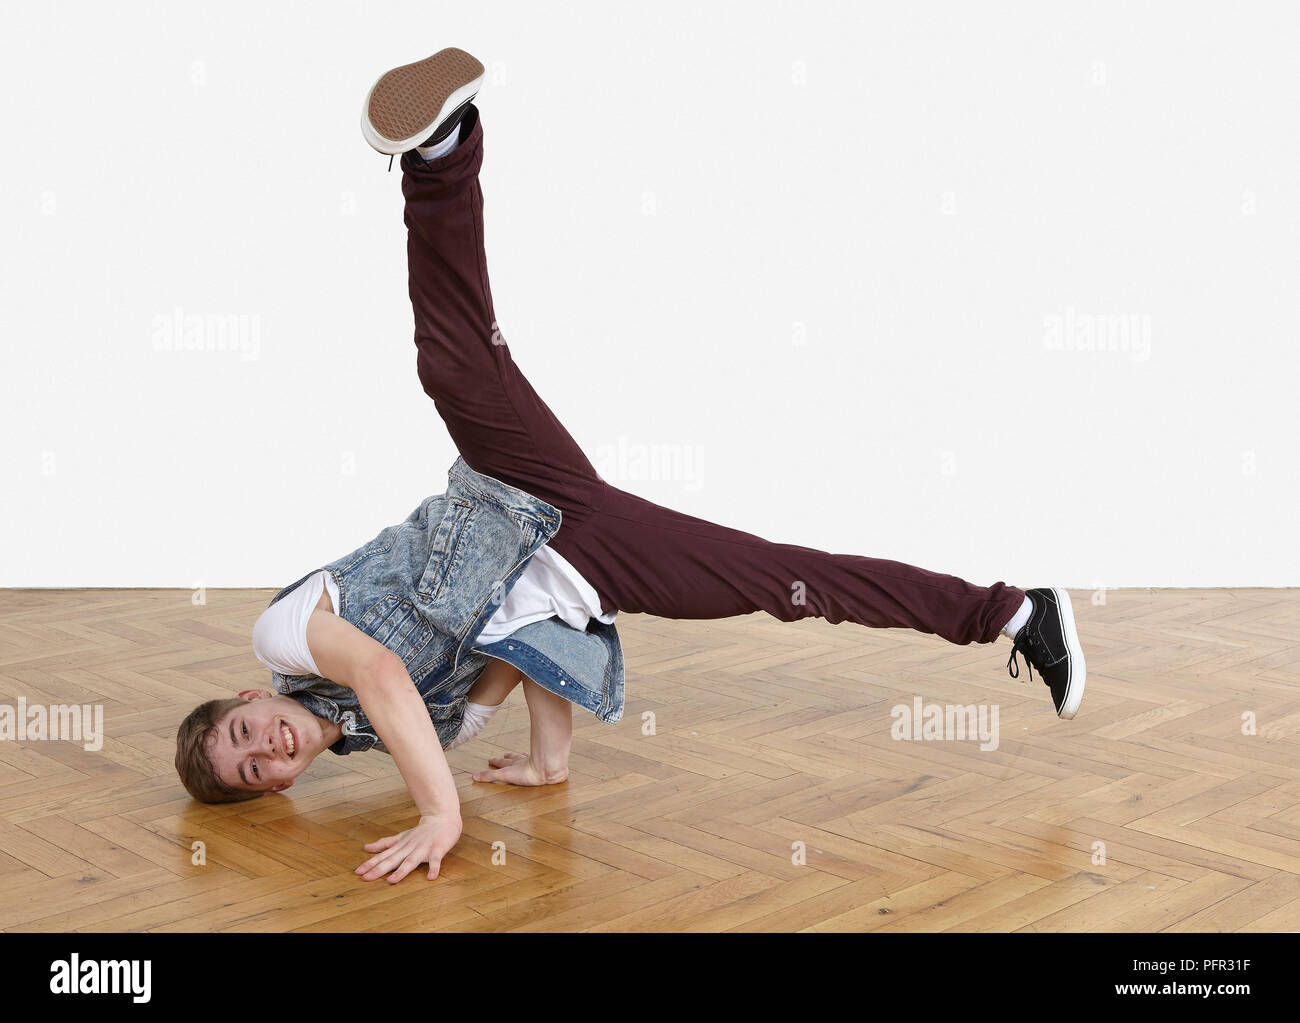 Teenager performing breakdance moves Stock Photo - Alamy